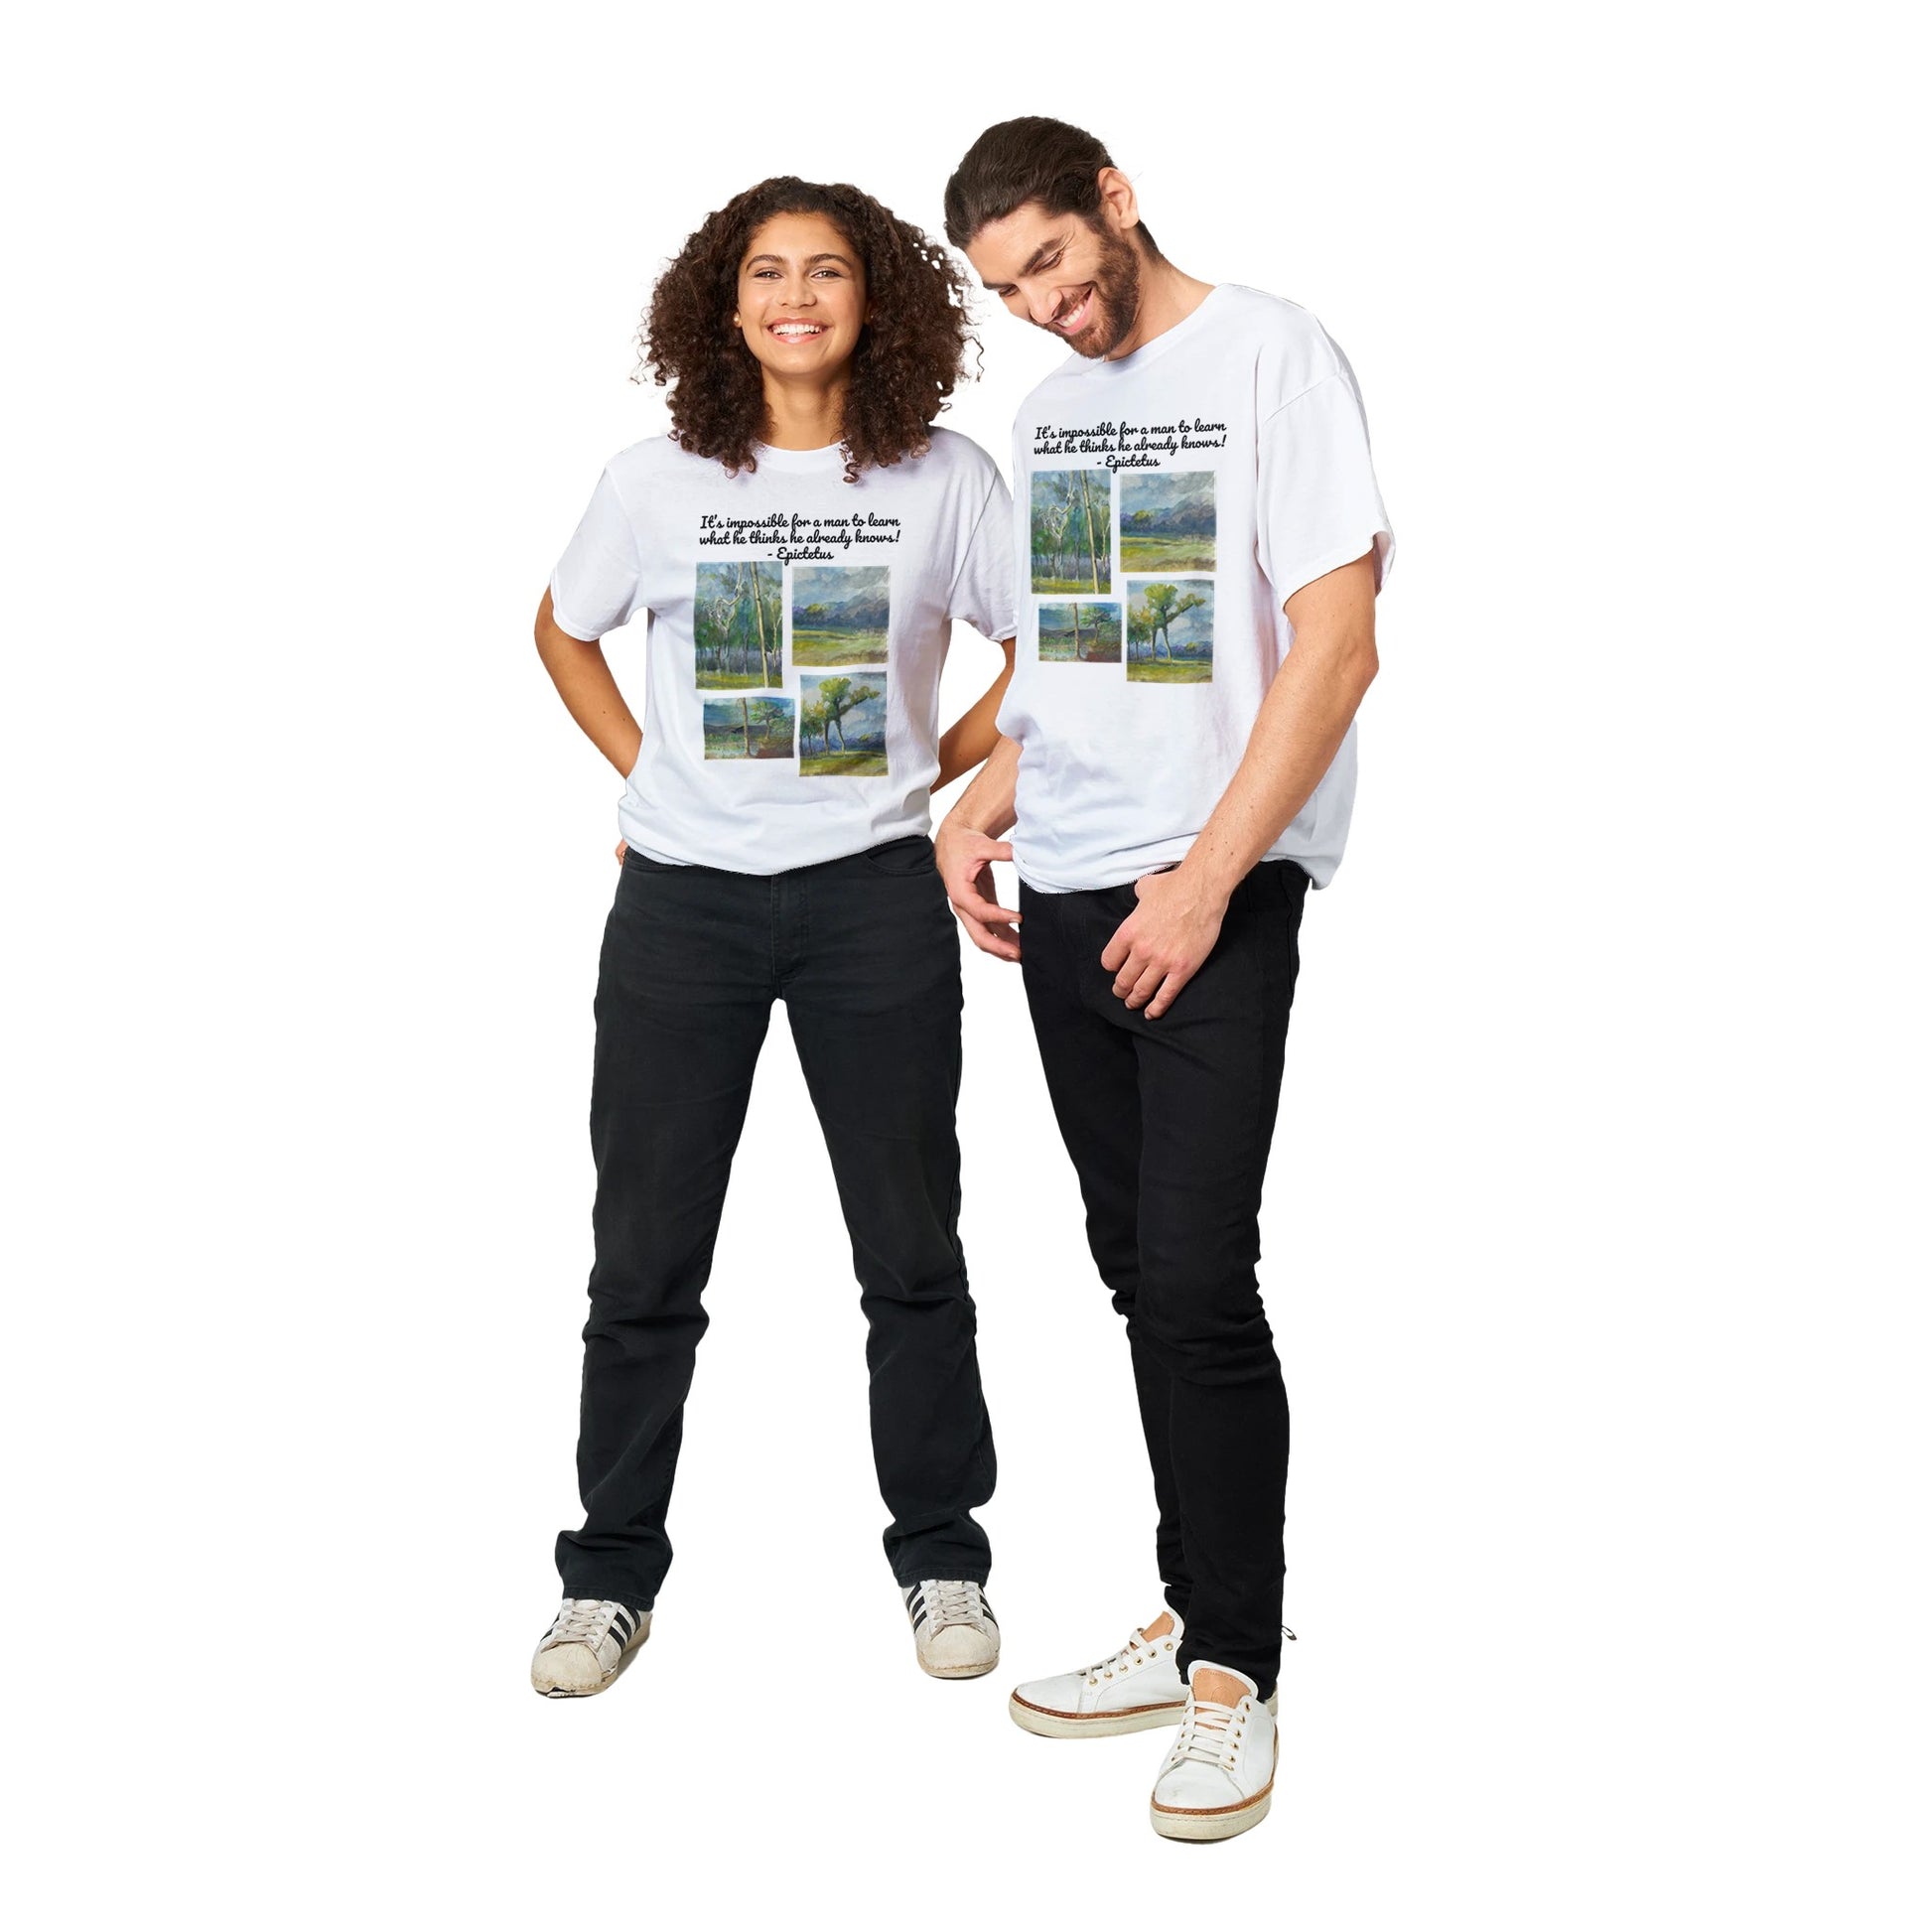 A natural heavyweight Unisex Crewneck cotton t-shirt with artwork It’s impossible for a man to learn what he thinks he already knows! on the front from WhatYa Say Apparel worn by Happy woman and man couple standing side by side.